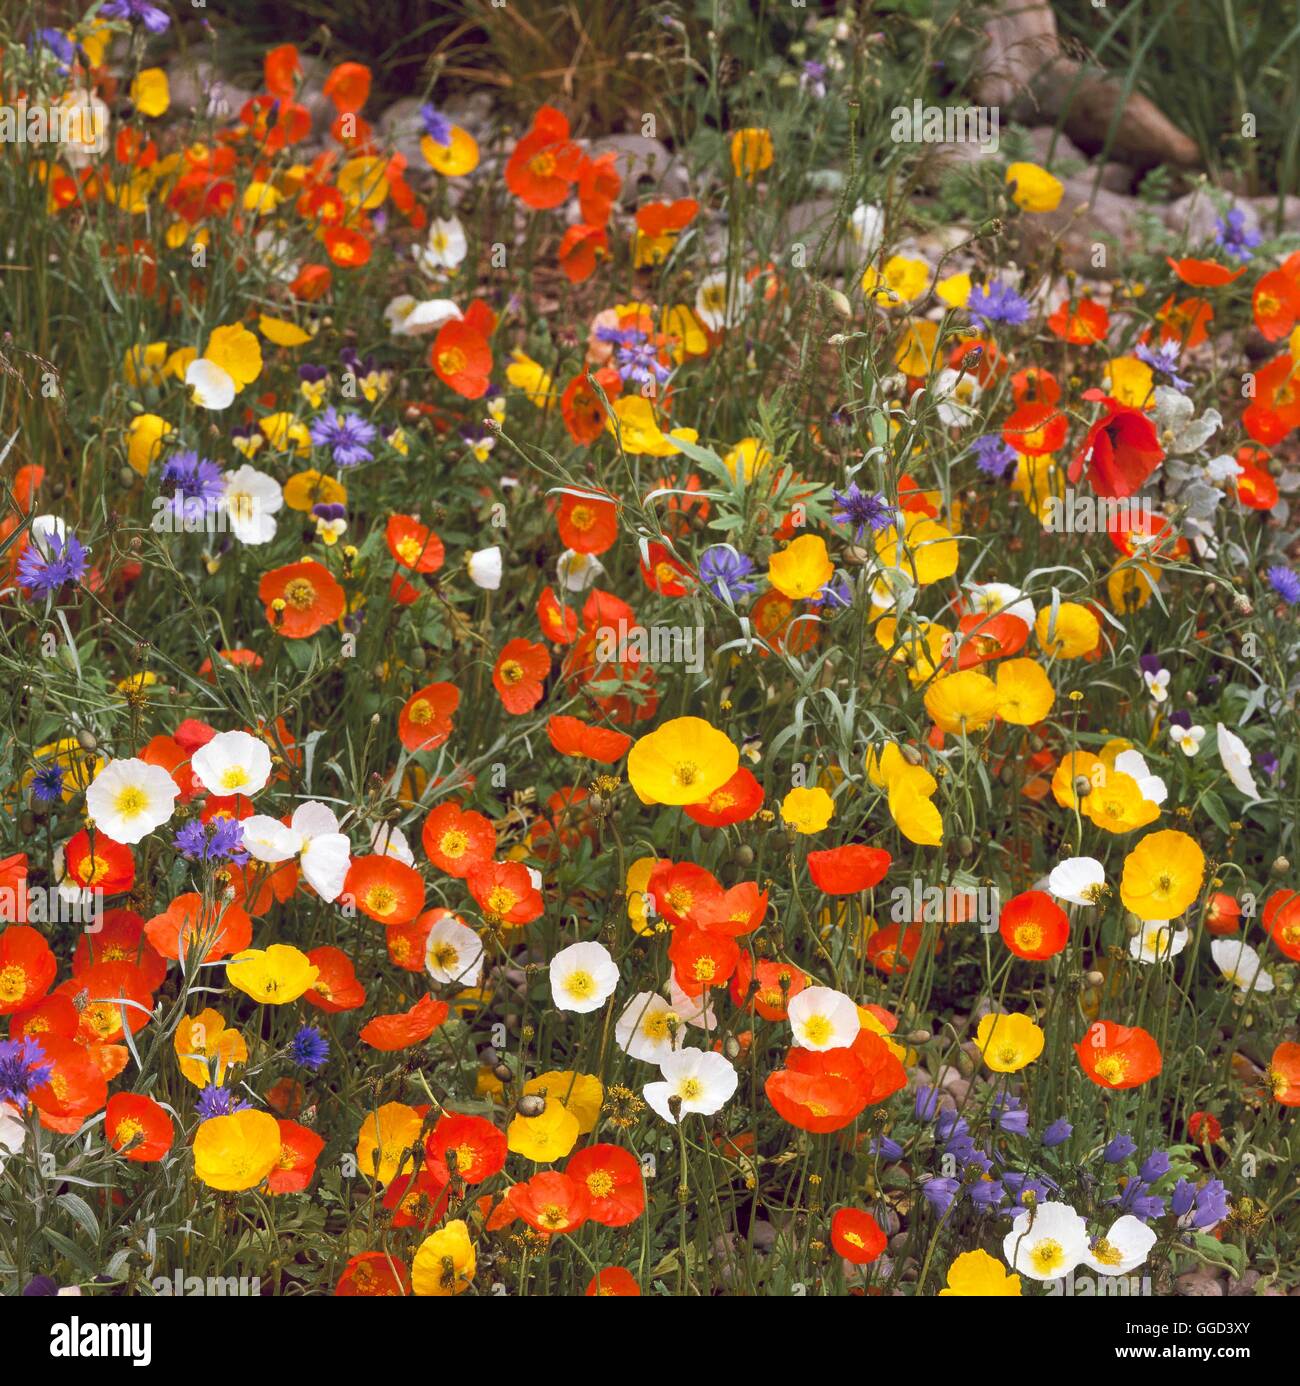 Annuals - Mixed - Iceland Poppies and Cornflowers - (Please credit: Photos Hort/ The Marney Hall Consultancy)   ANN096 Stock Photo